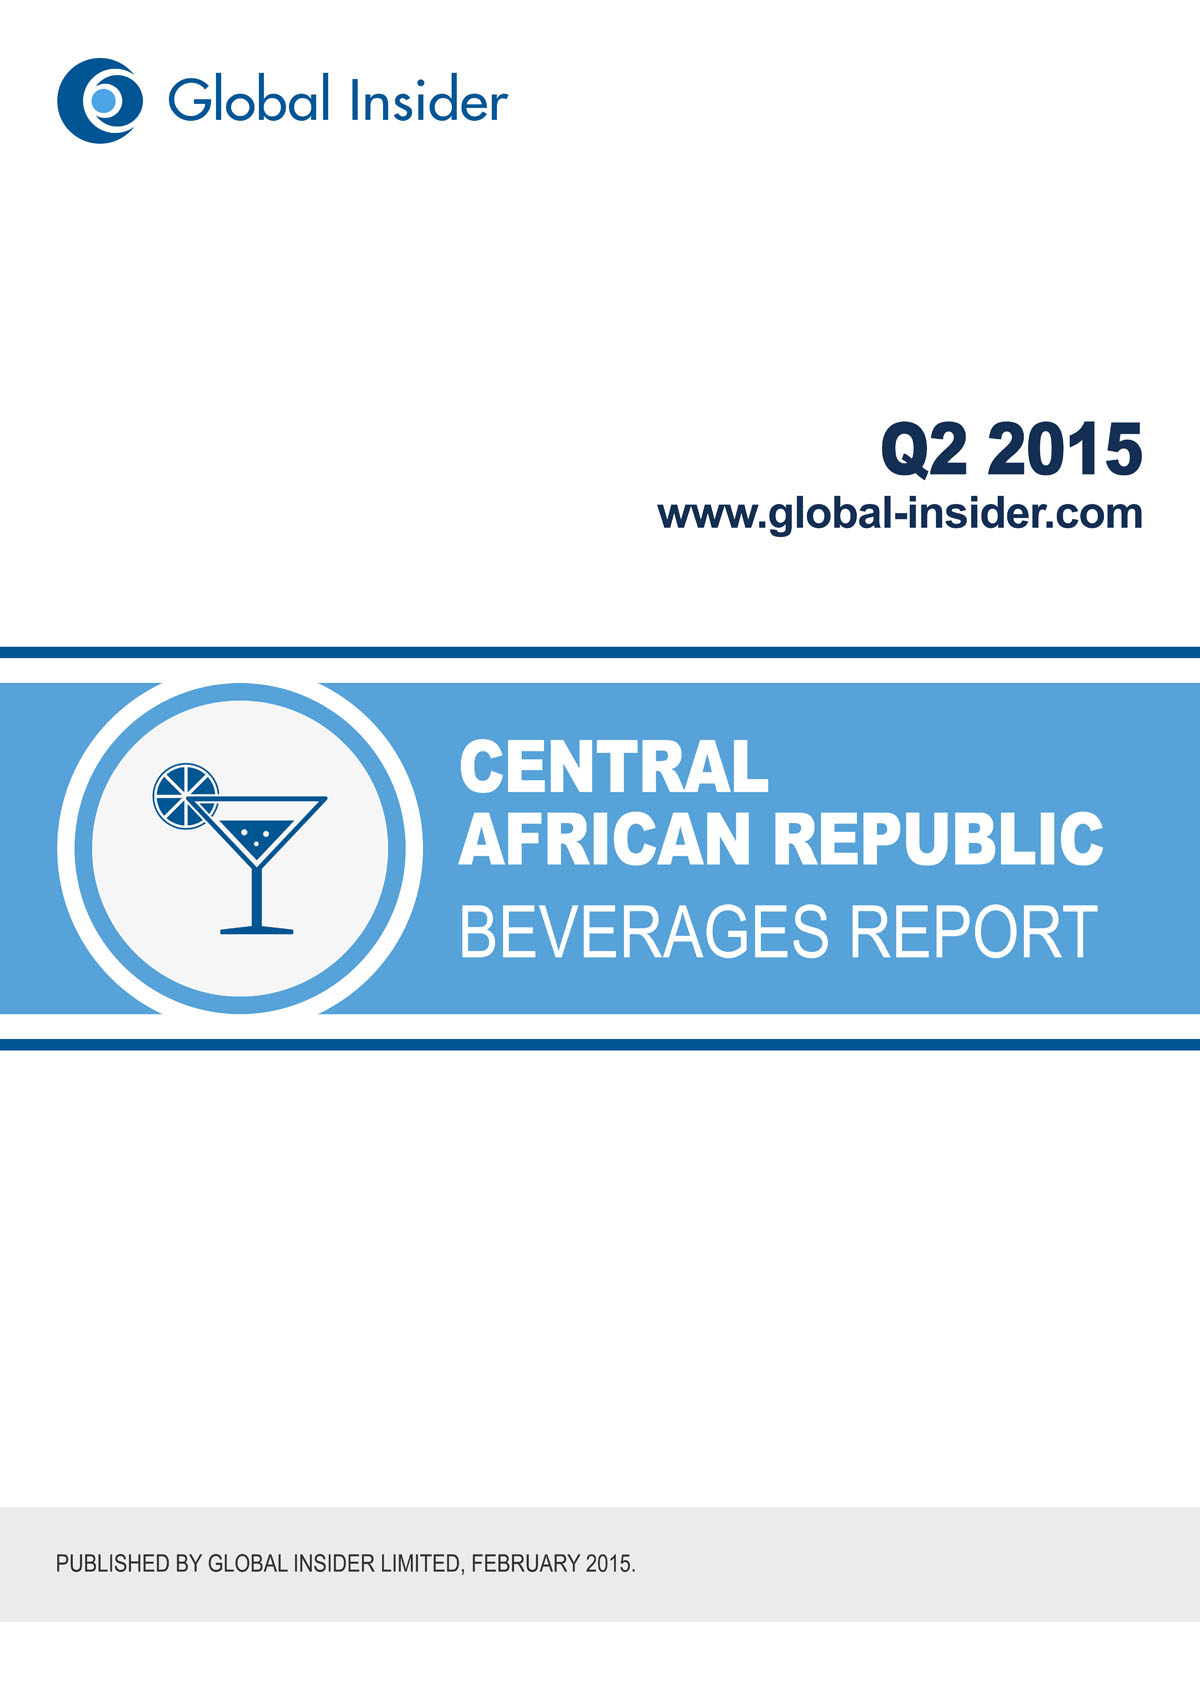 Central African Republic Beverages Report